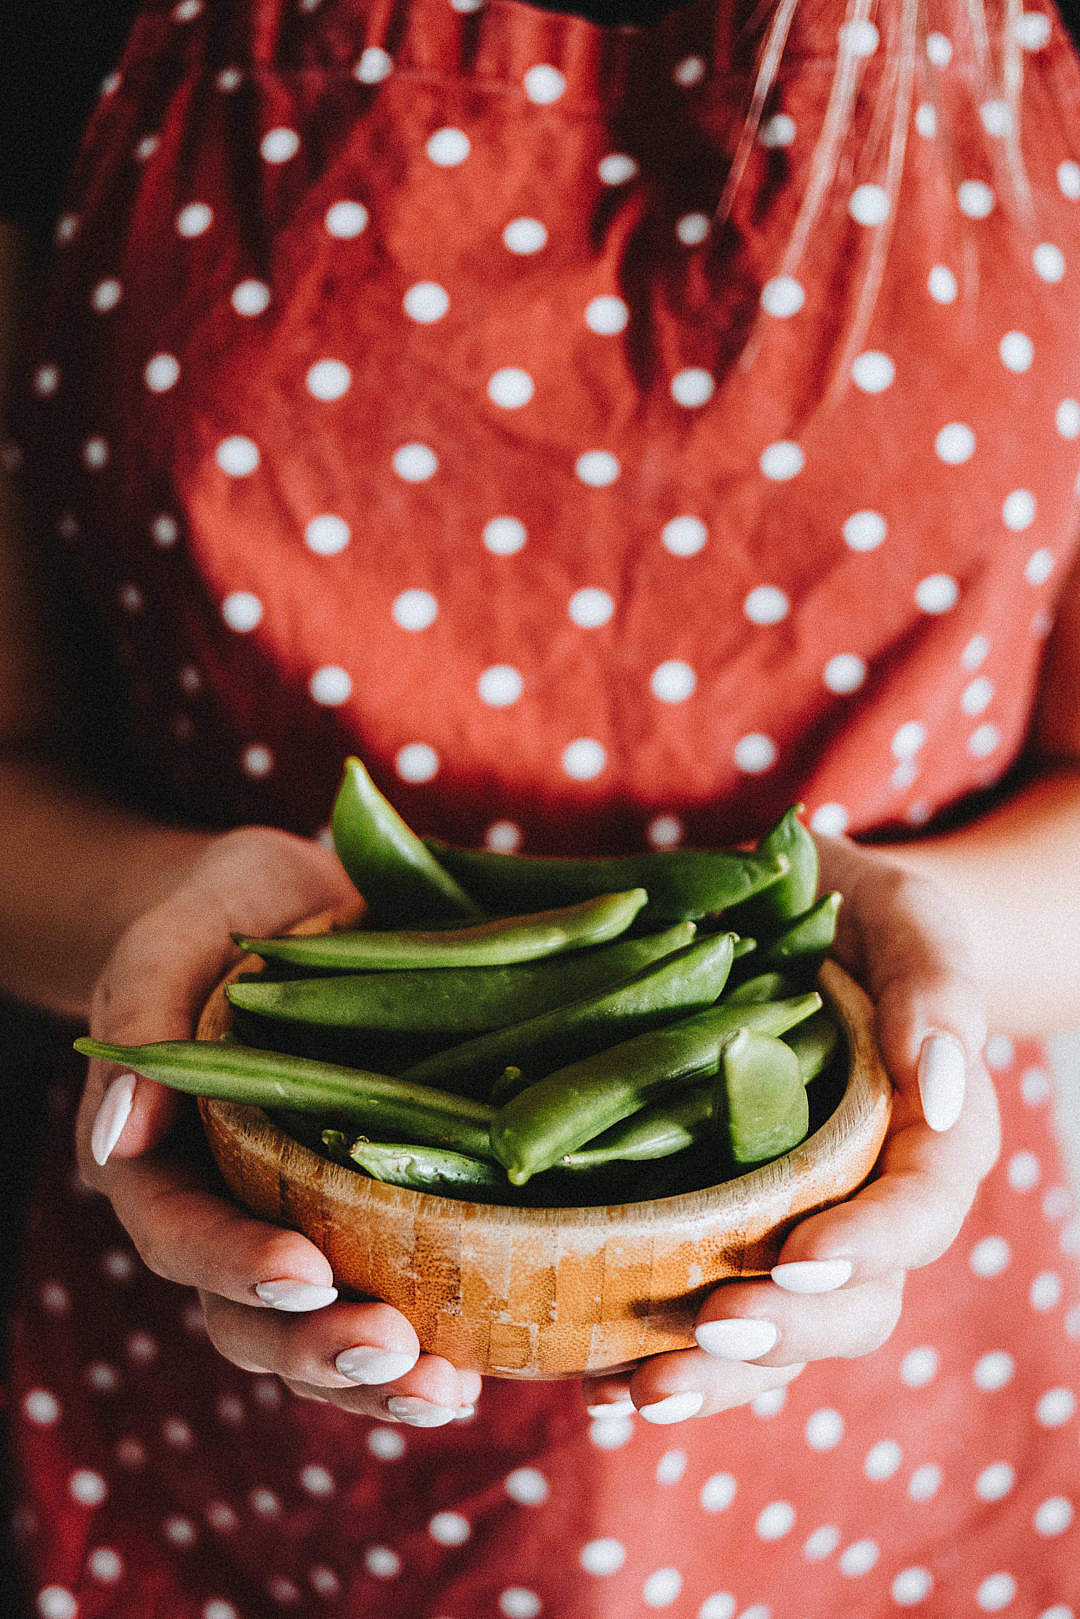 Woman Holding a Bowl of Pea Pods